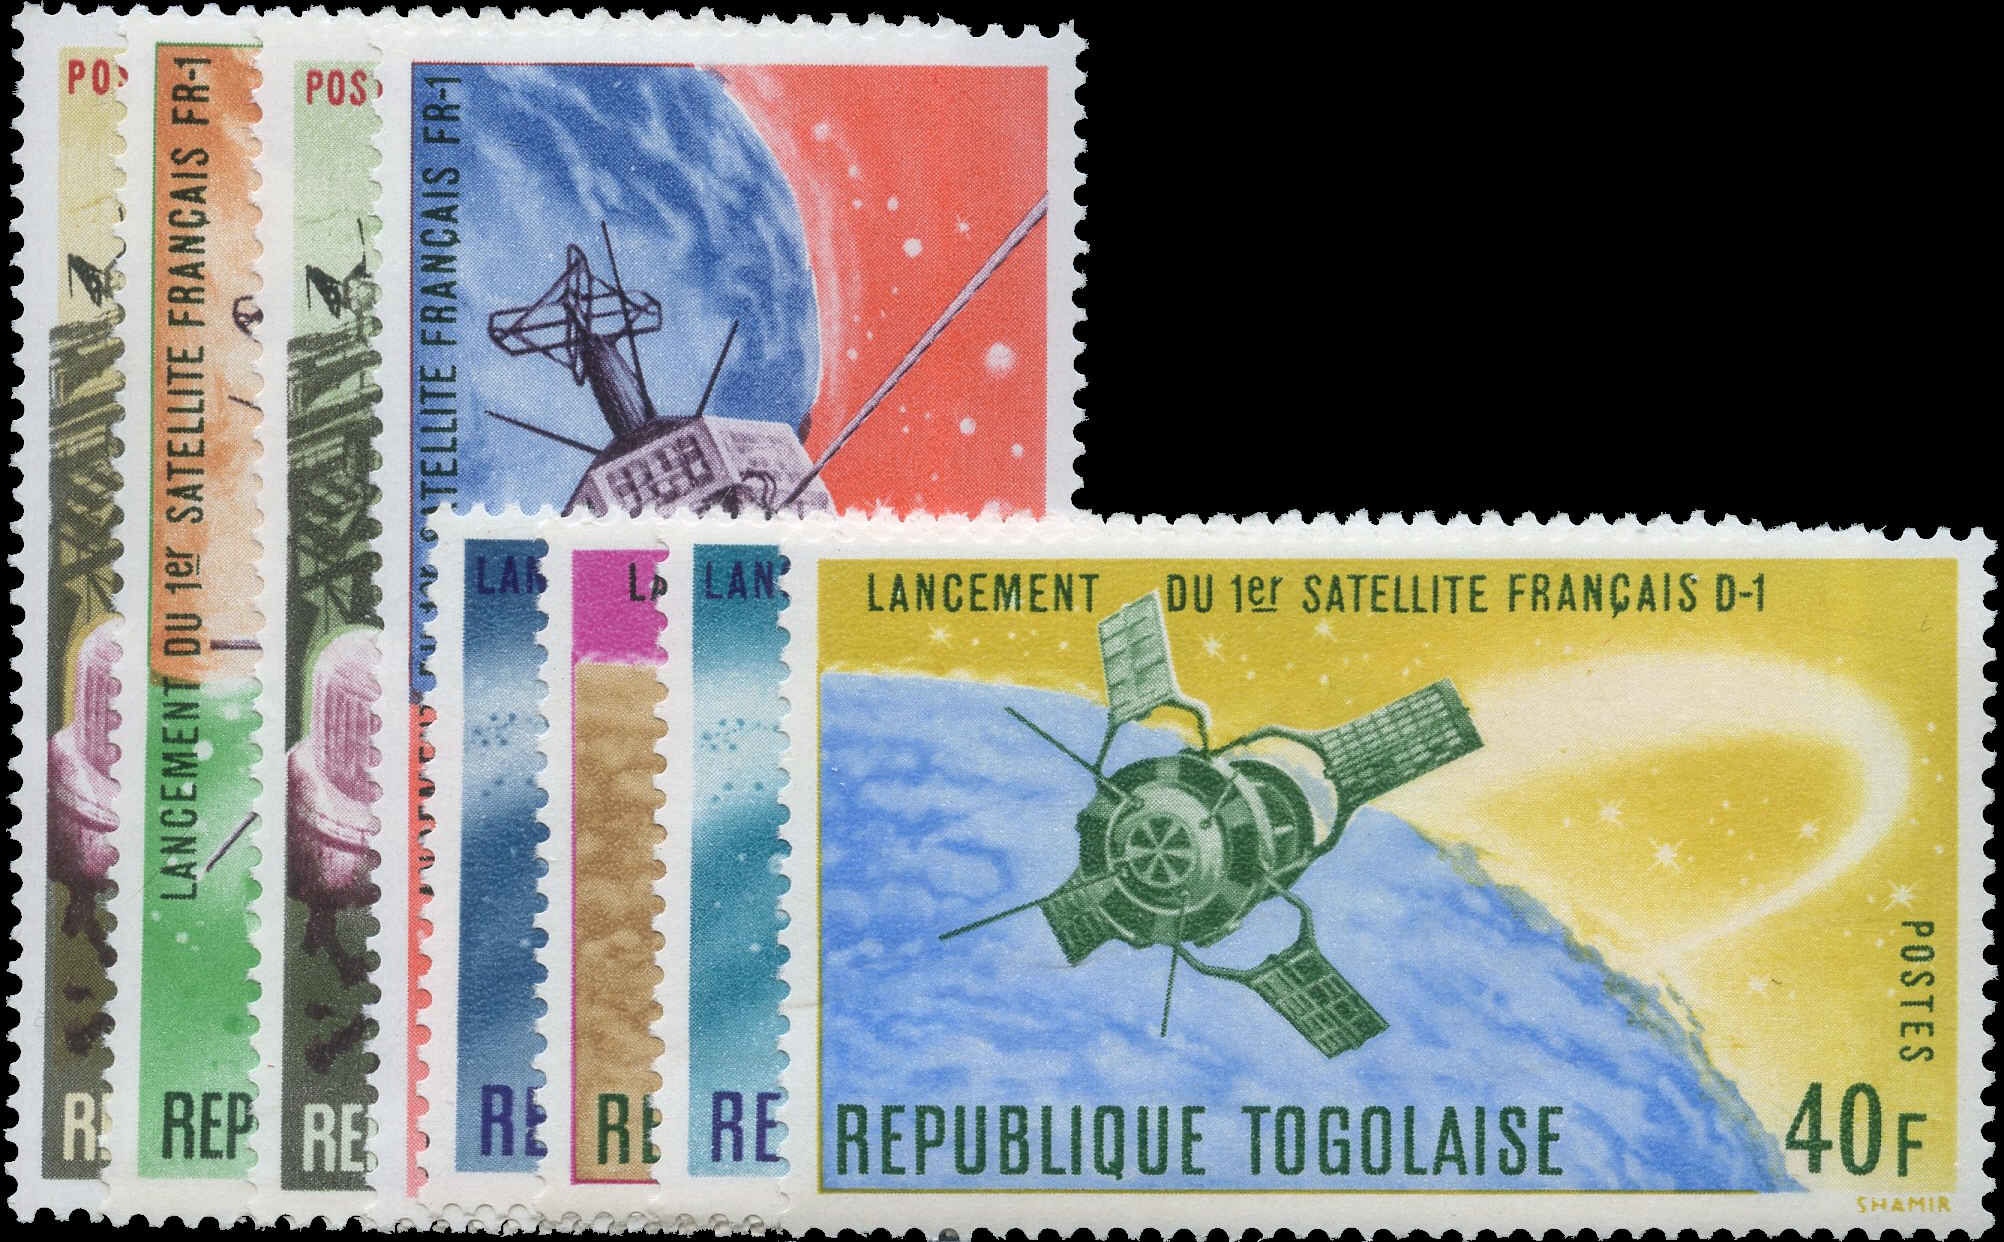 Buy TOGO #593-8, C65-C66 - French achievements in space (1966)